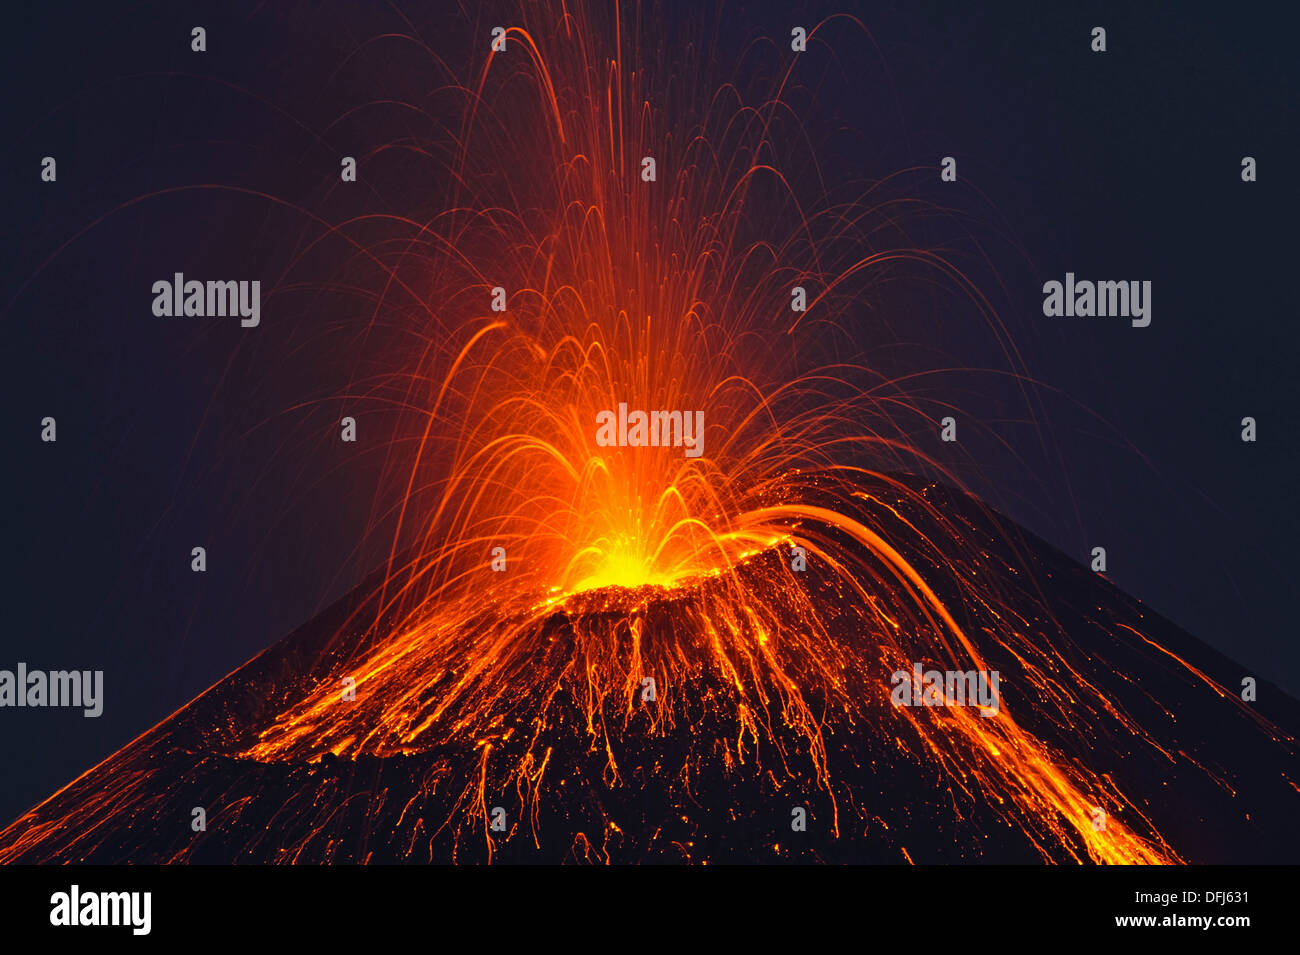 Violent eruption with considerable projections of material, Anak Krakatau Volcano, Indonesia Stock Photo